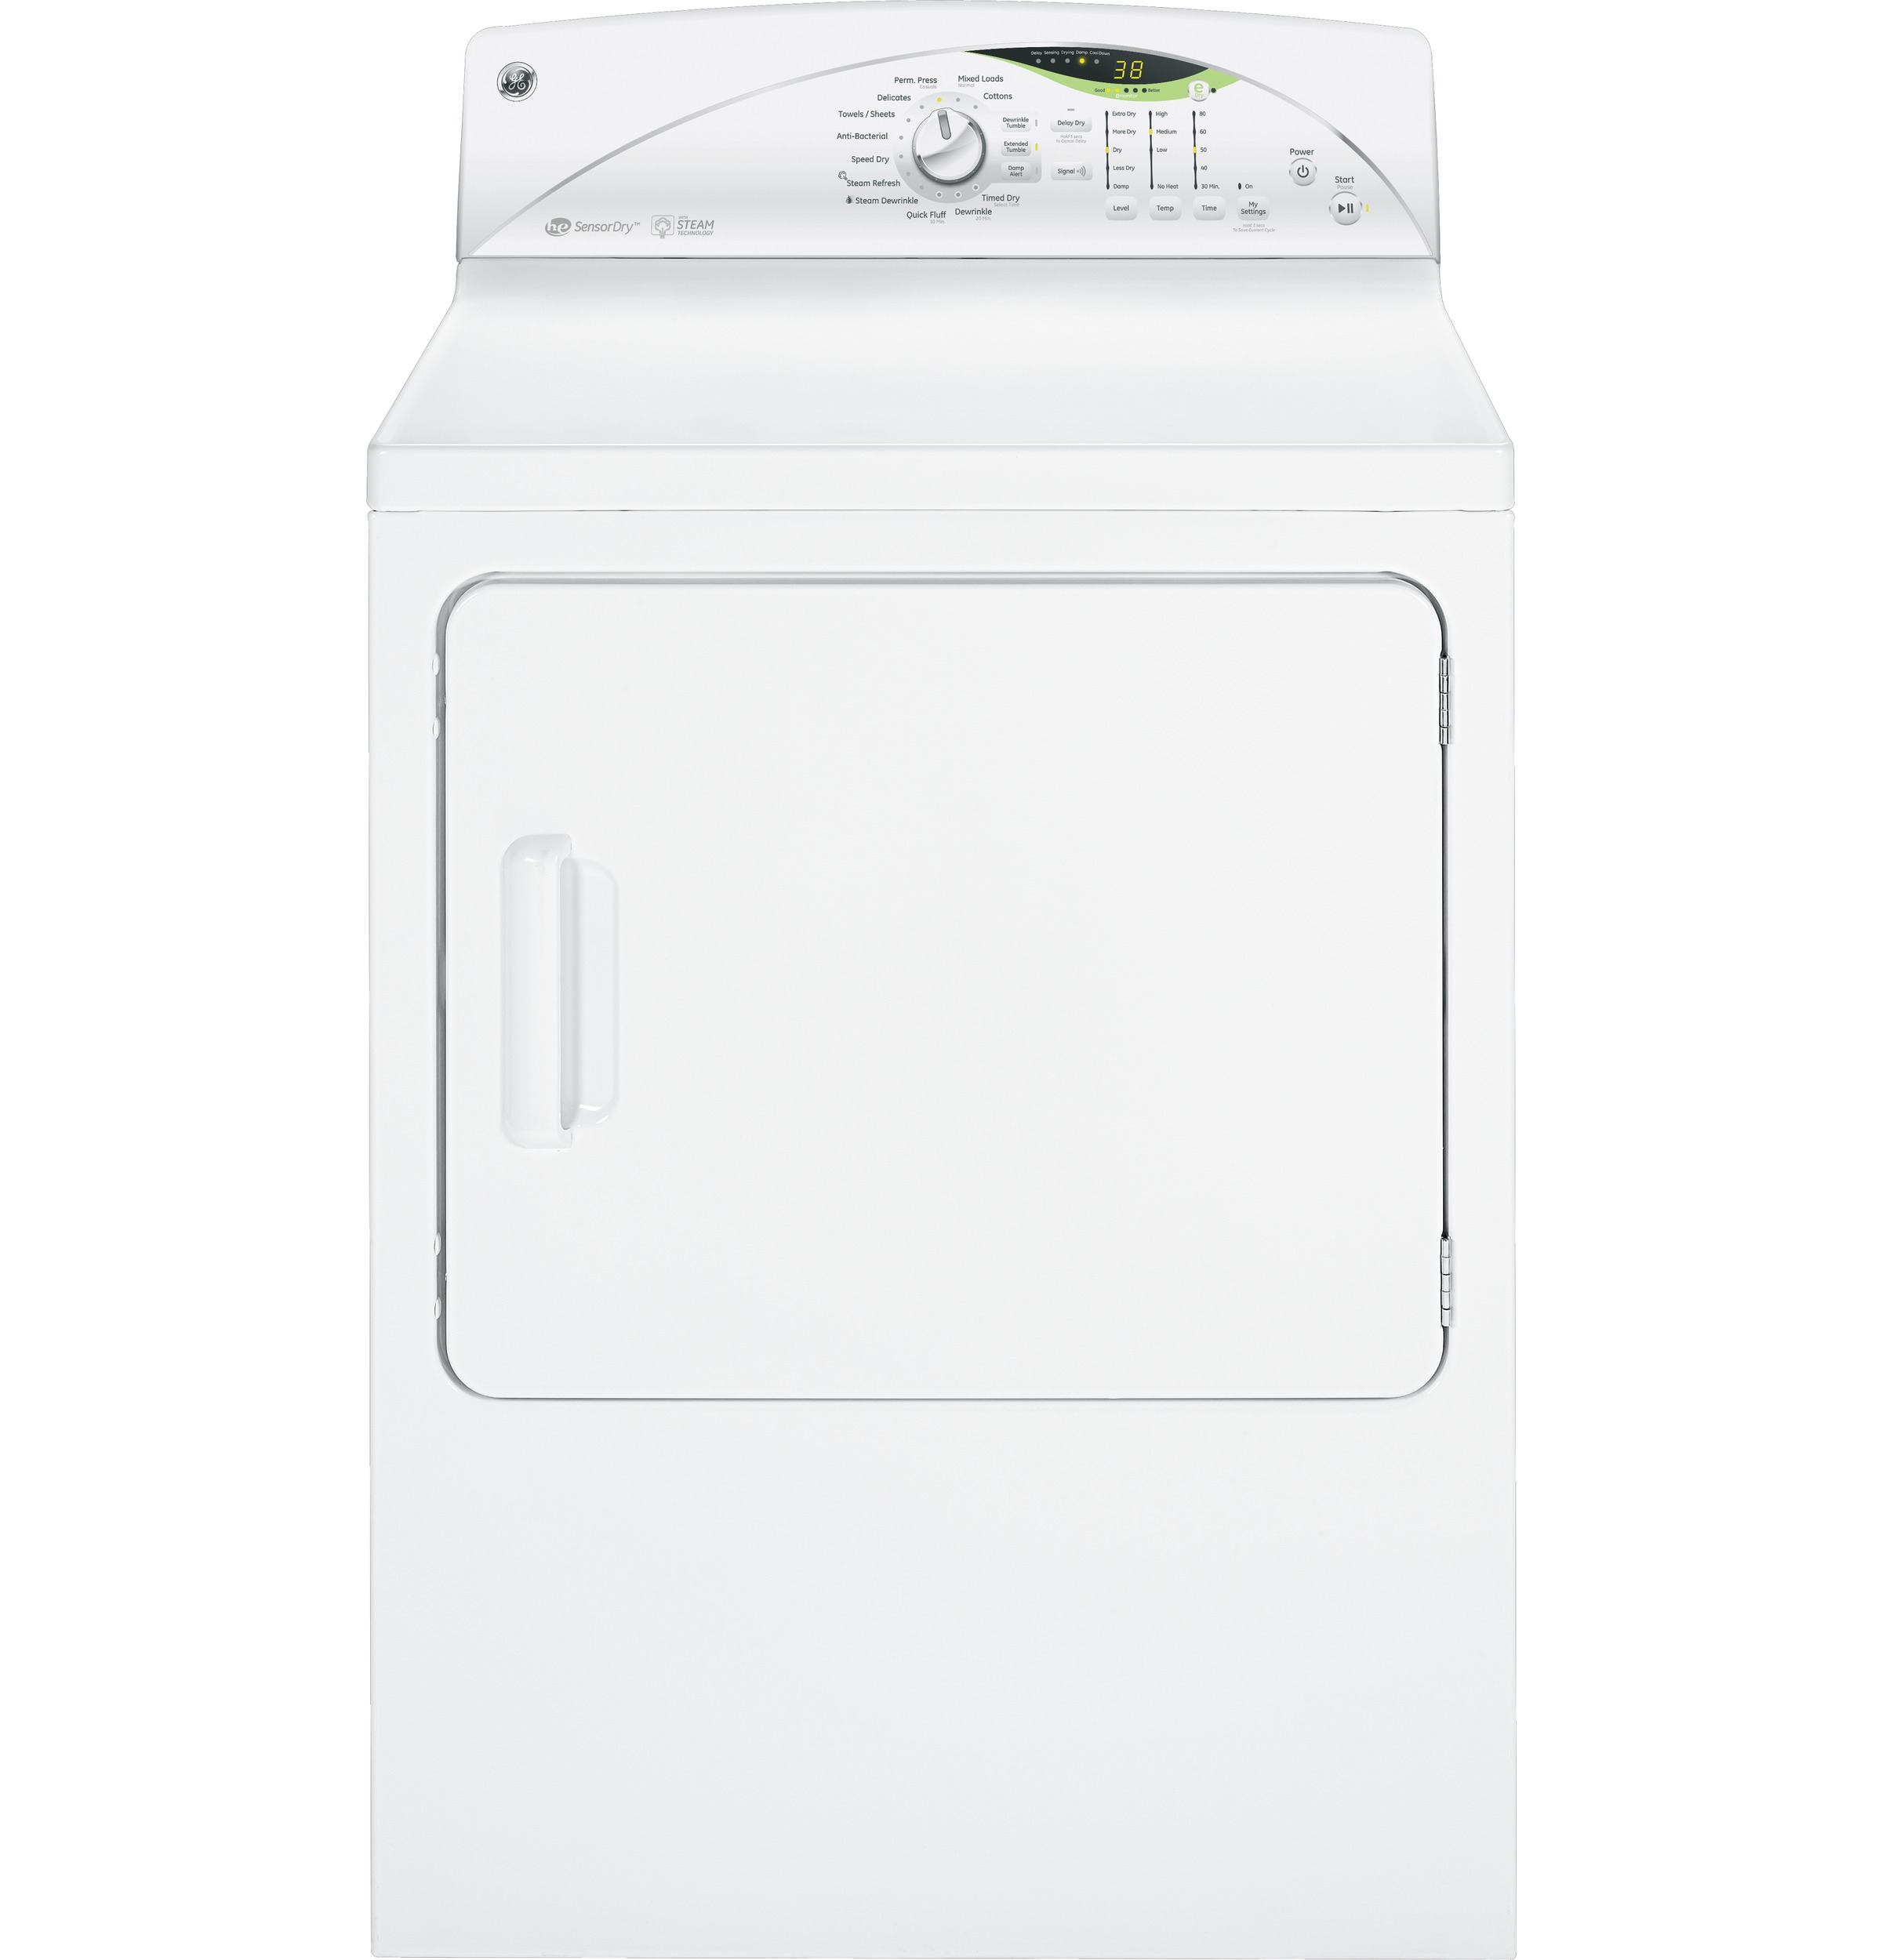 GE® 7.0 cu. ft. capacity electric dryer with Steam and HE SensorDry™